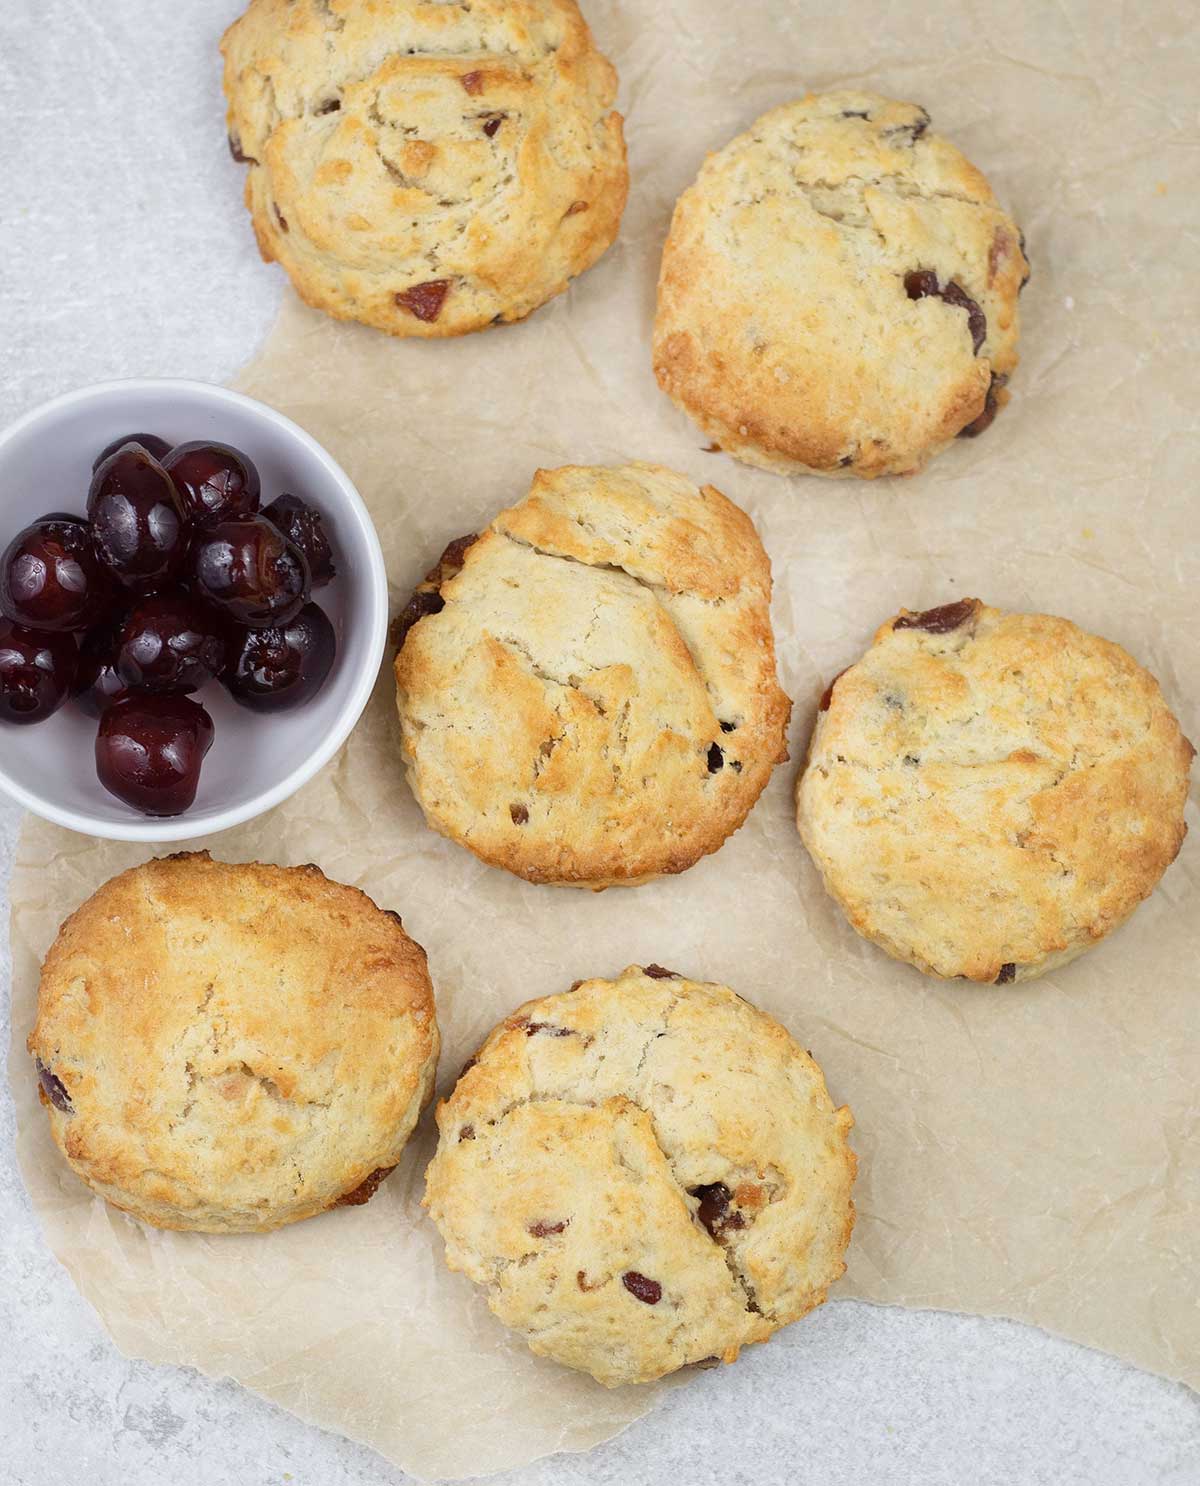 Cherry Scones and a small bowl of Glacé cherries